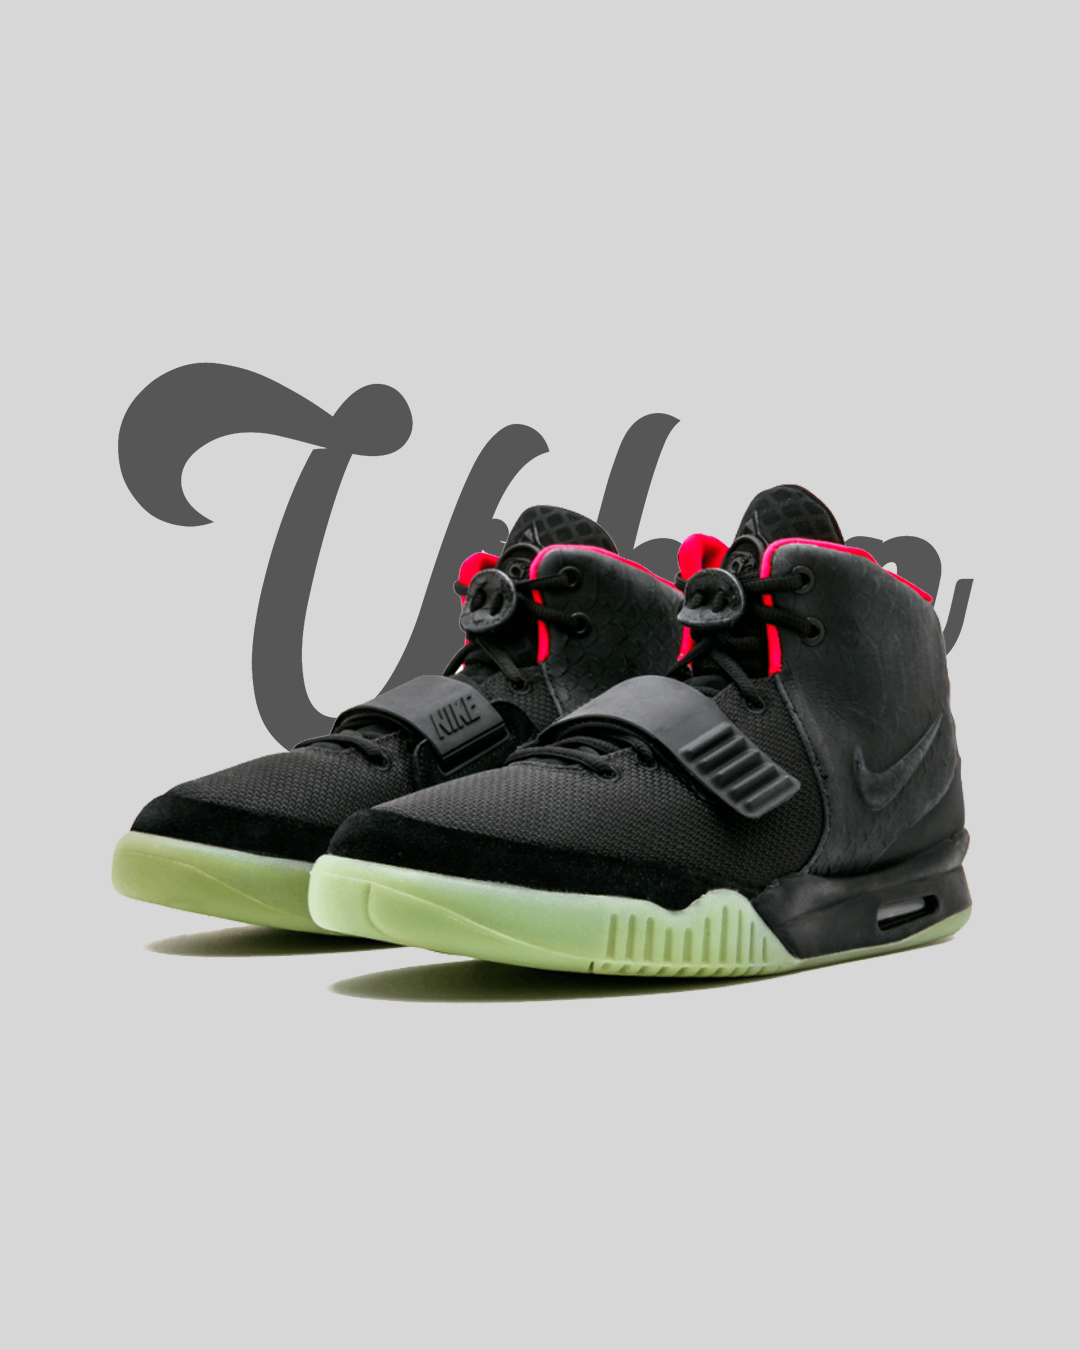 Nike Yeezy 2 Solar Red – Urban Collection